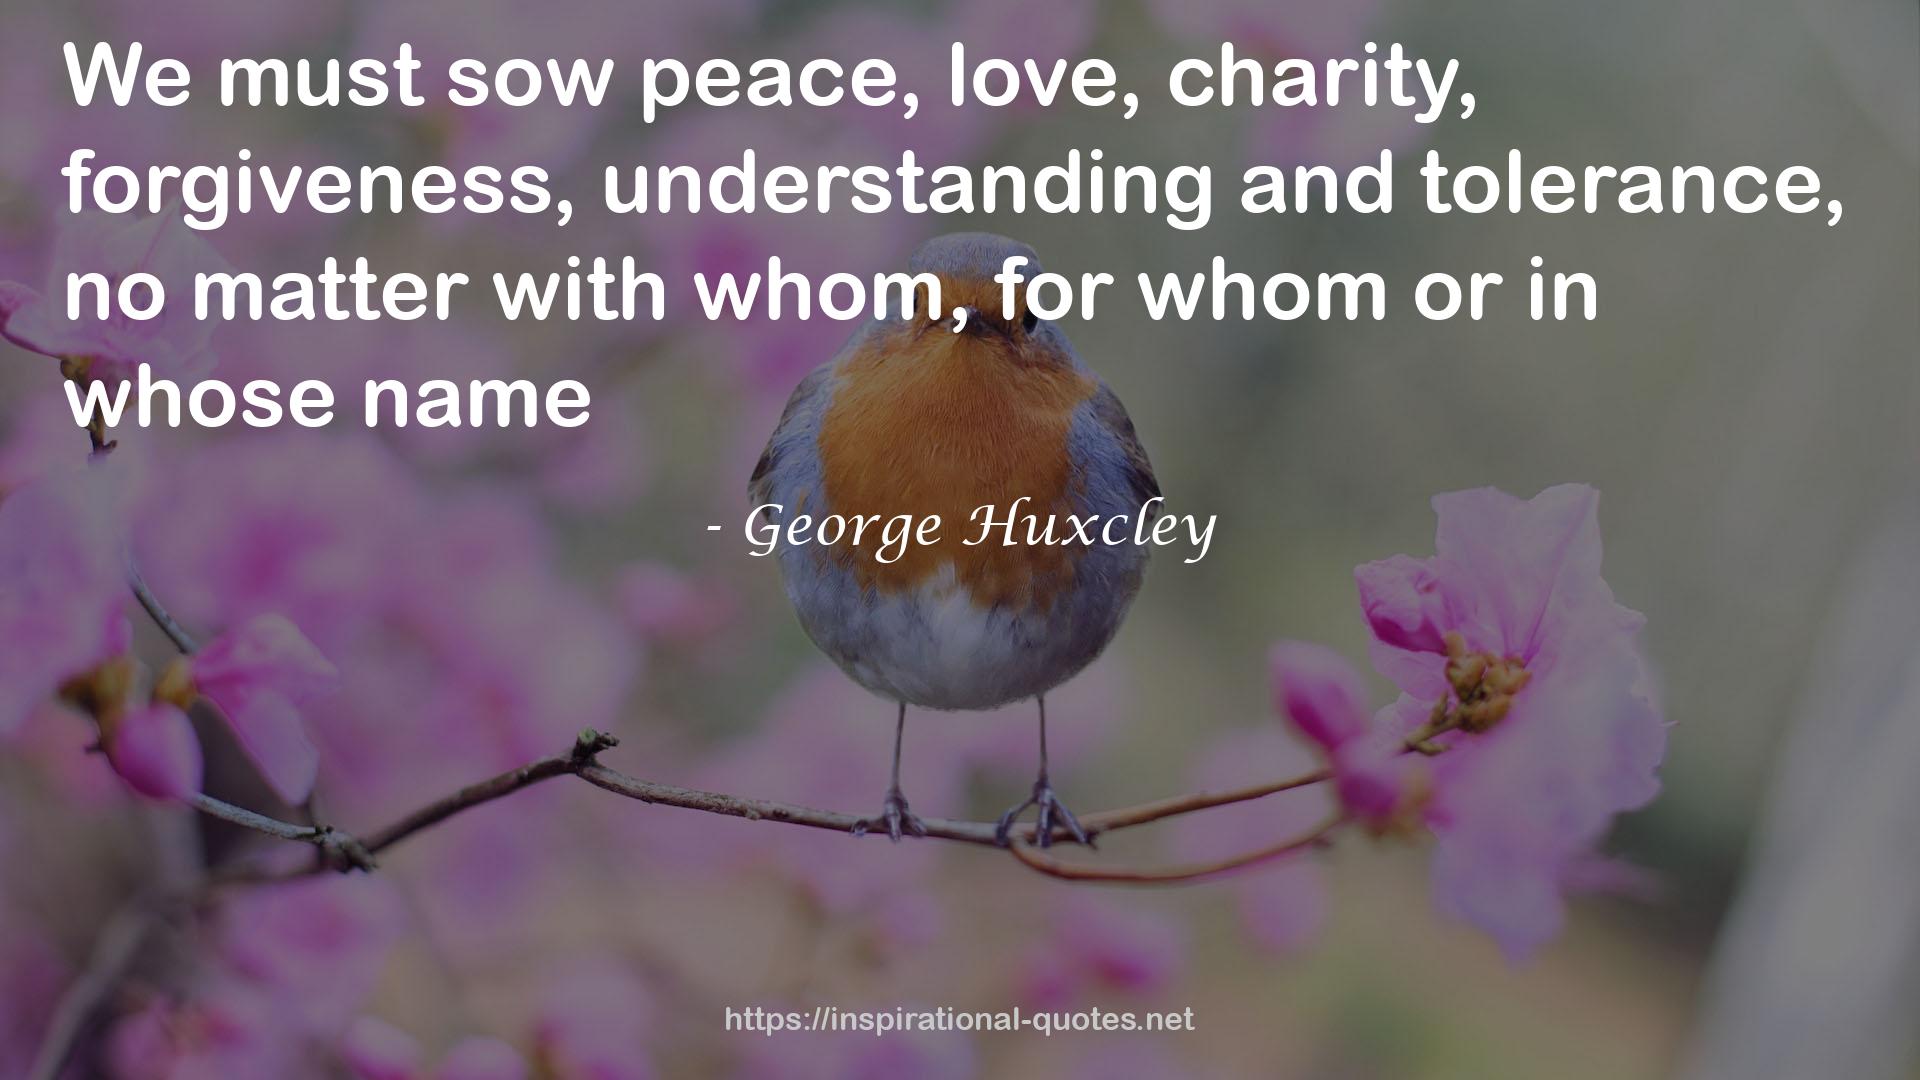 George Huxcley QUOTES